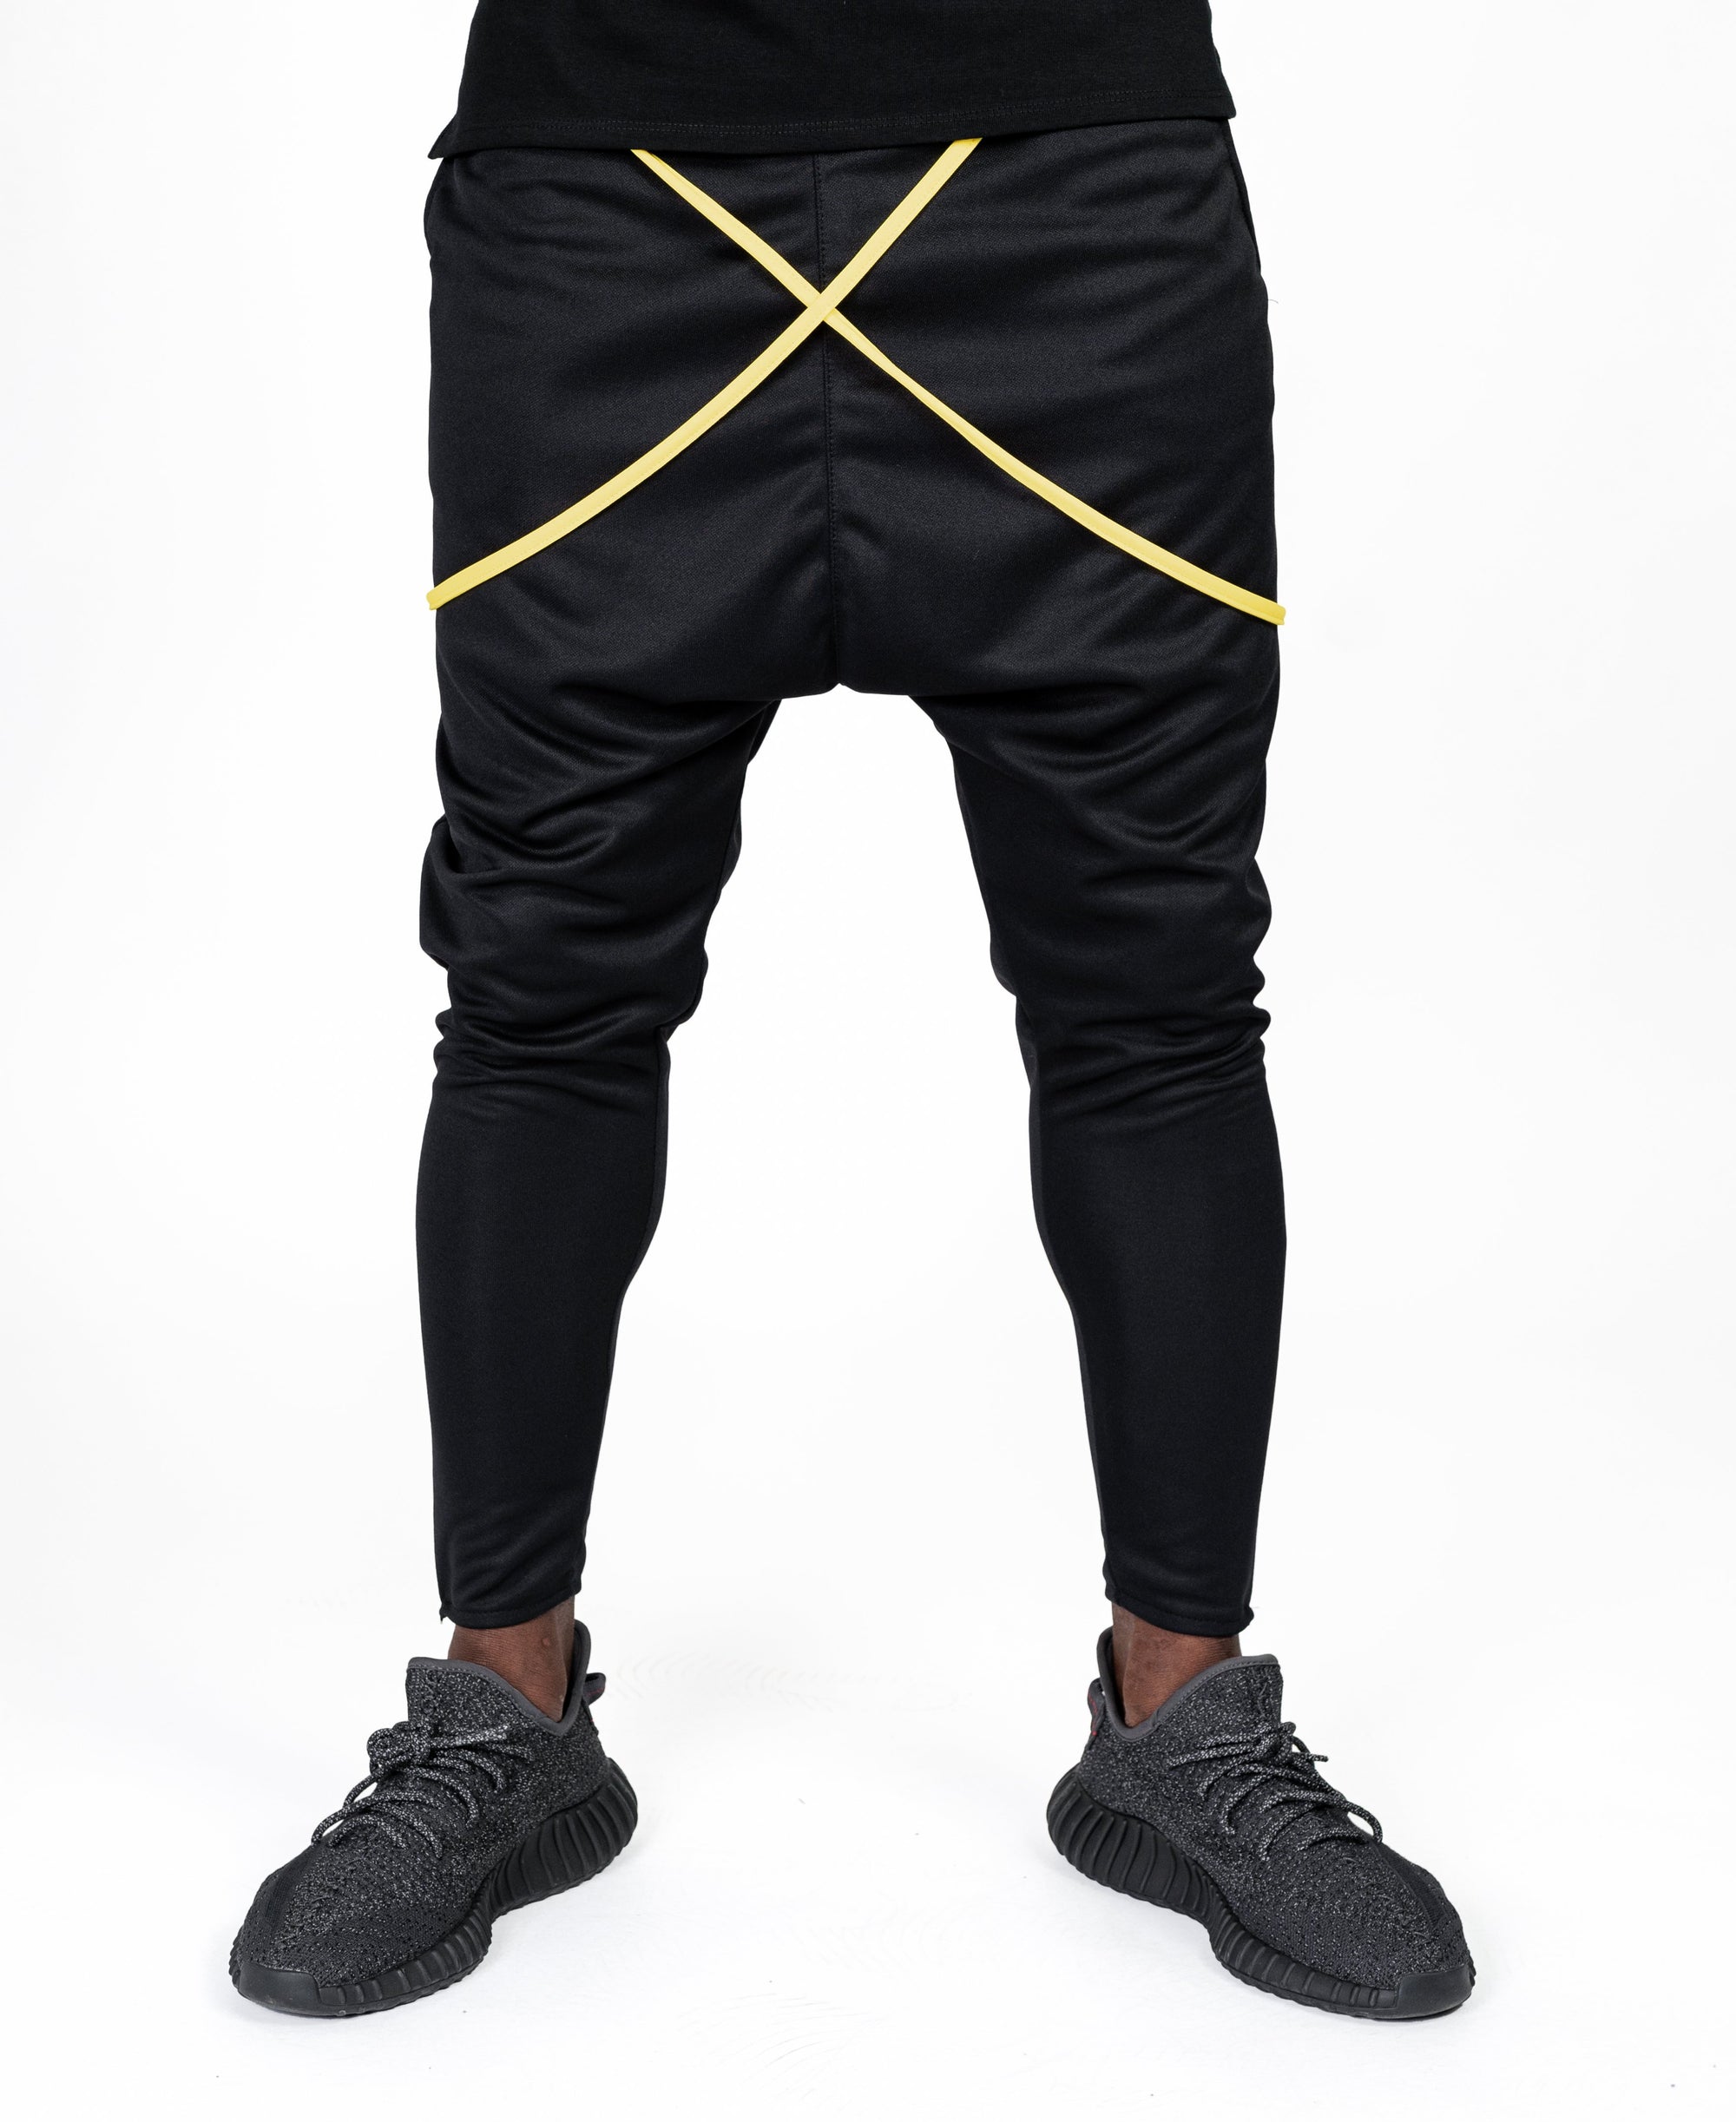 Black trousers with yellow design - Fatai Style